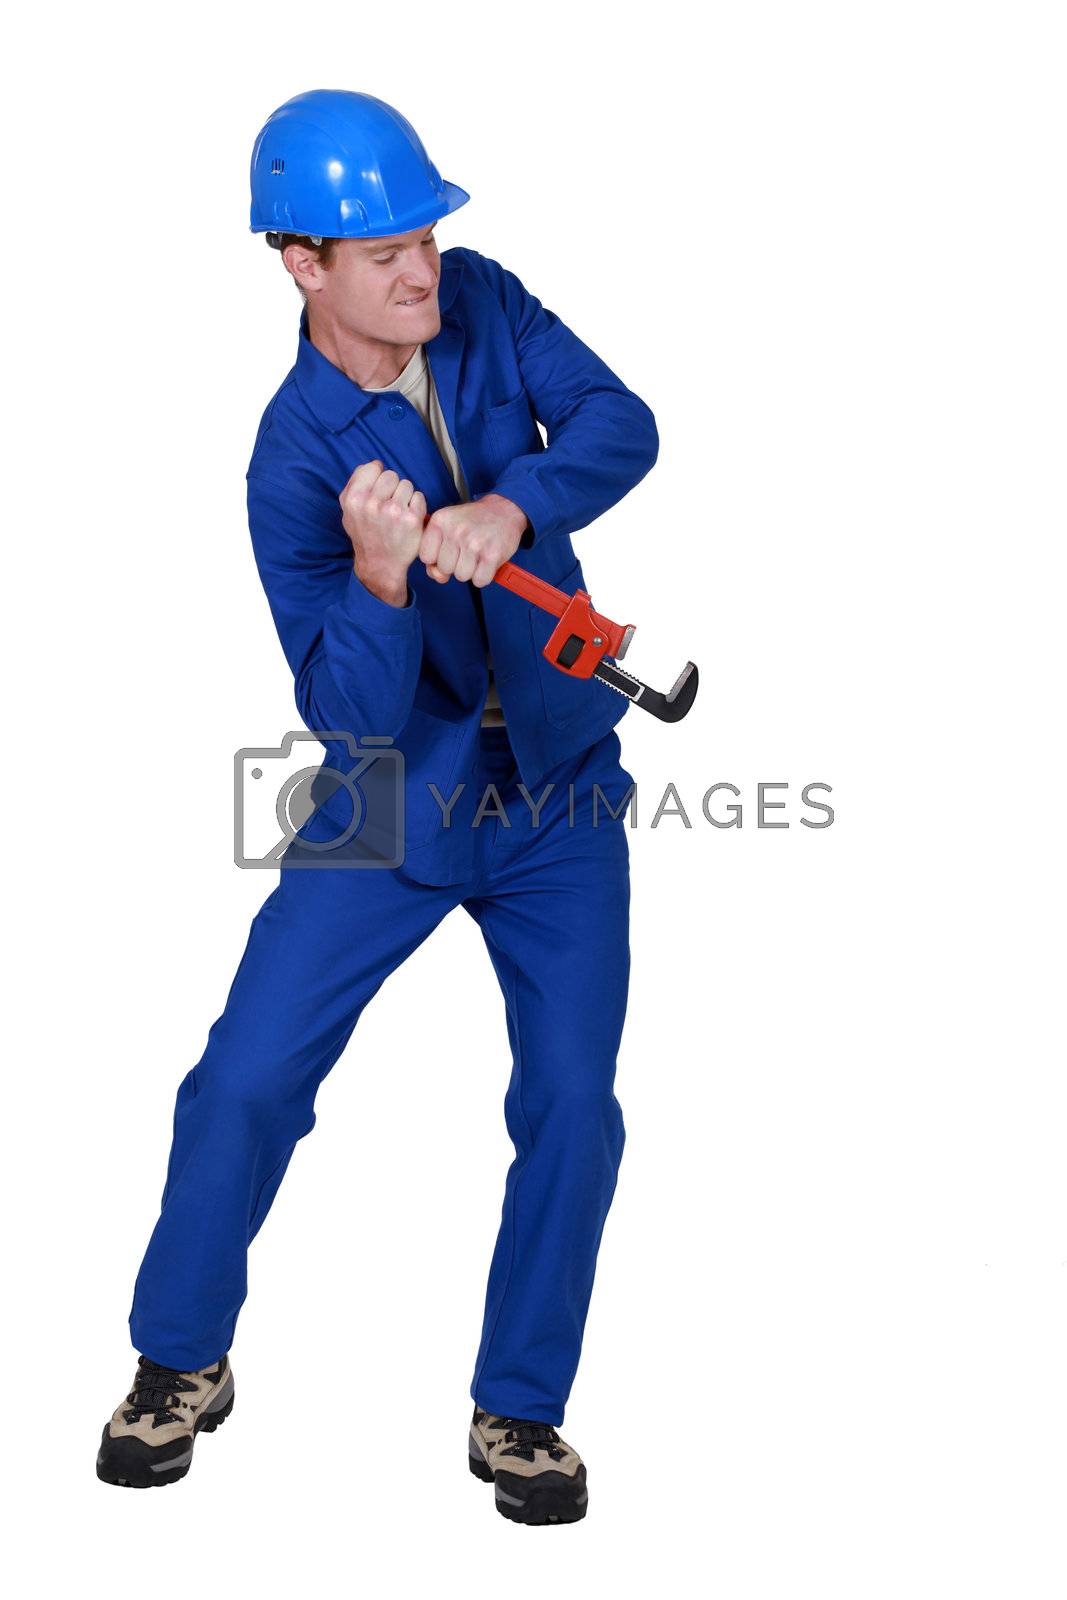 Royalty free image of Tradesman trying to force open an object using a pipe wrench by phovoir